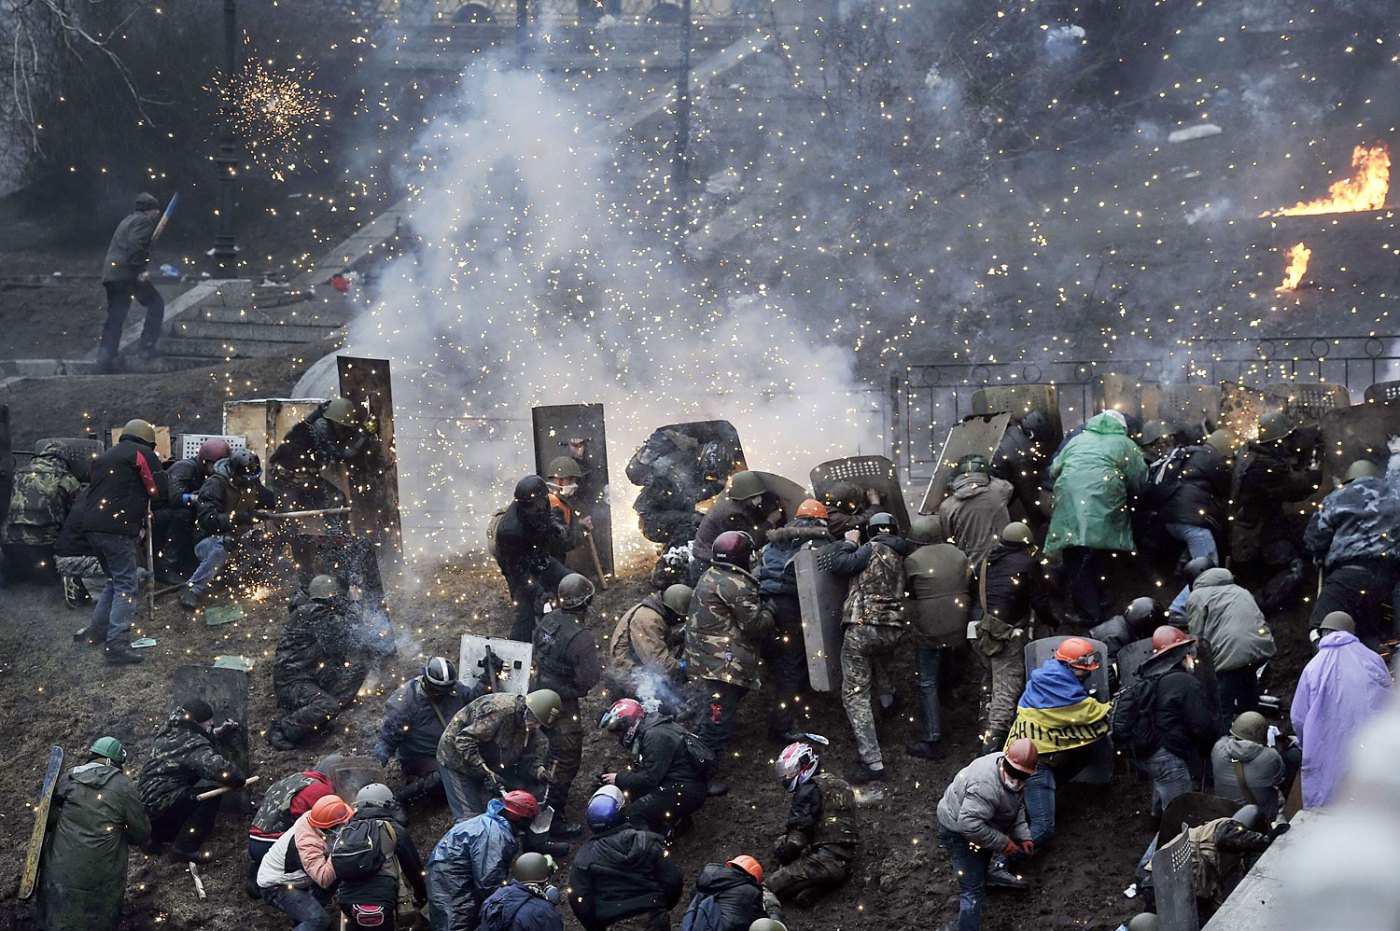 Protesters clash with police after gaining new positions near the Independence square in Kiev, Ukraine on February 20, 2014. (Louisa Gouliamaki&mdash;AFP/Getty Images)